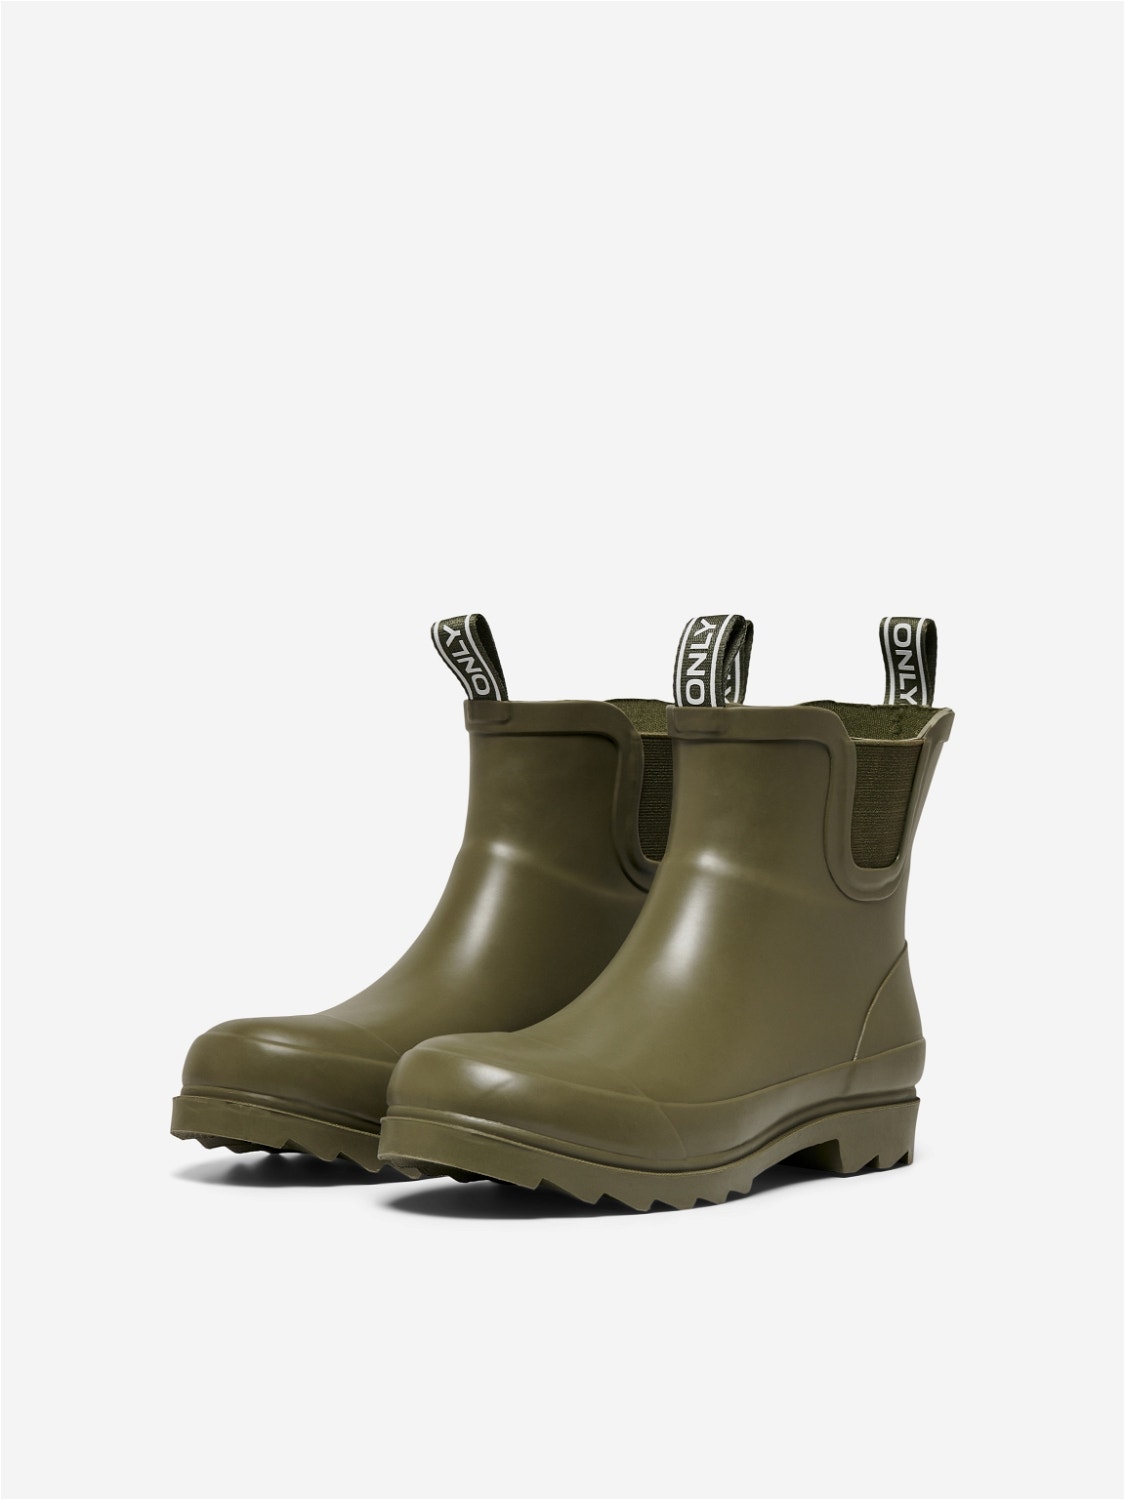 ONLY Short rain Boots -Olive Night - 15253234